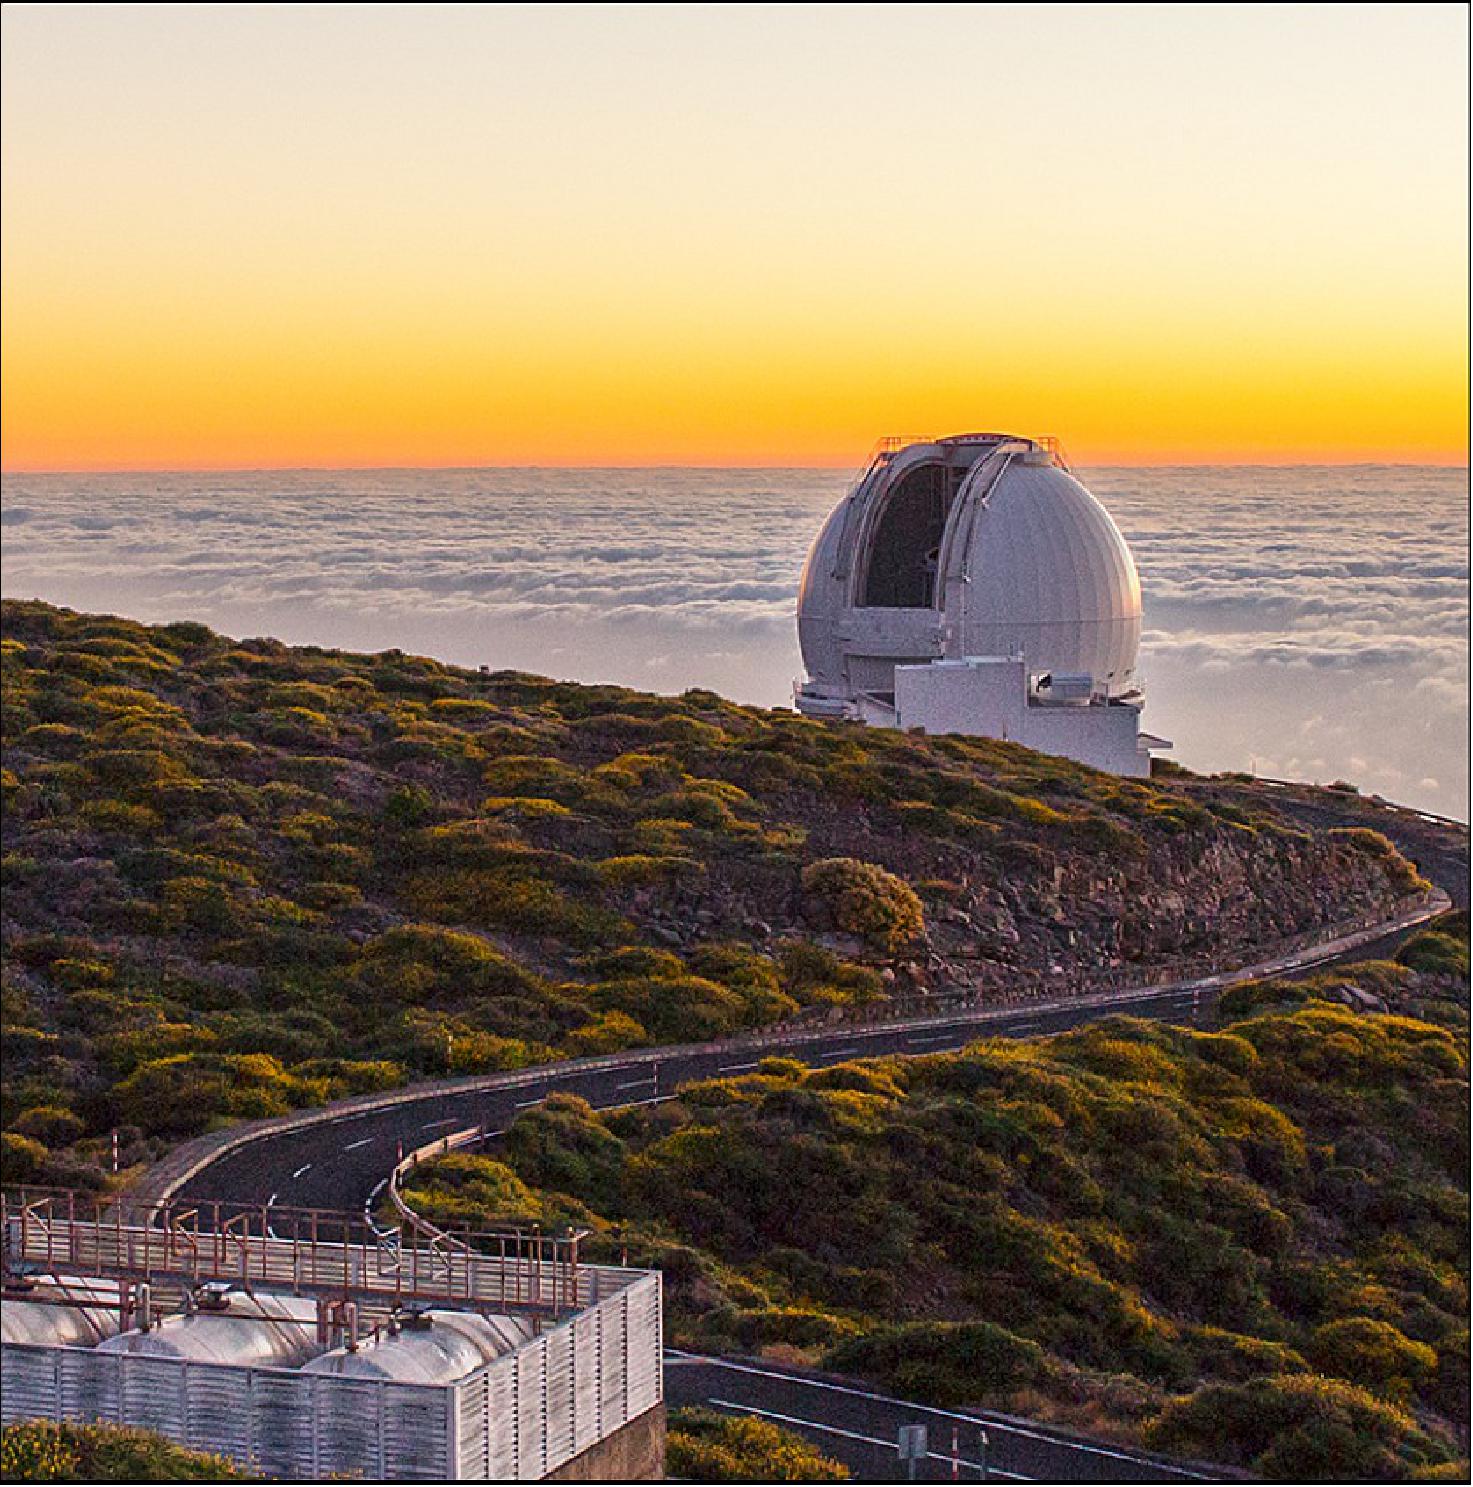 Figure 2: Roque de los Muchachos Observatory. At the edge of the Caldera de Taburiente National Park, at 2,400 meters above sea level, on the island of La Palma, there are some of the best telescopes in the world, among them the Gran Telescopio Canarias (GTC), image credit: IAC